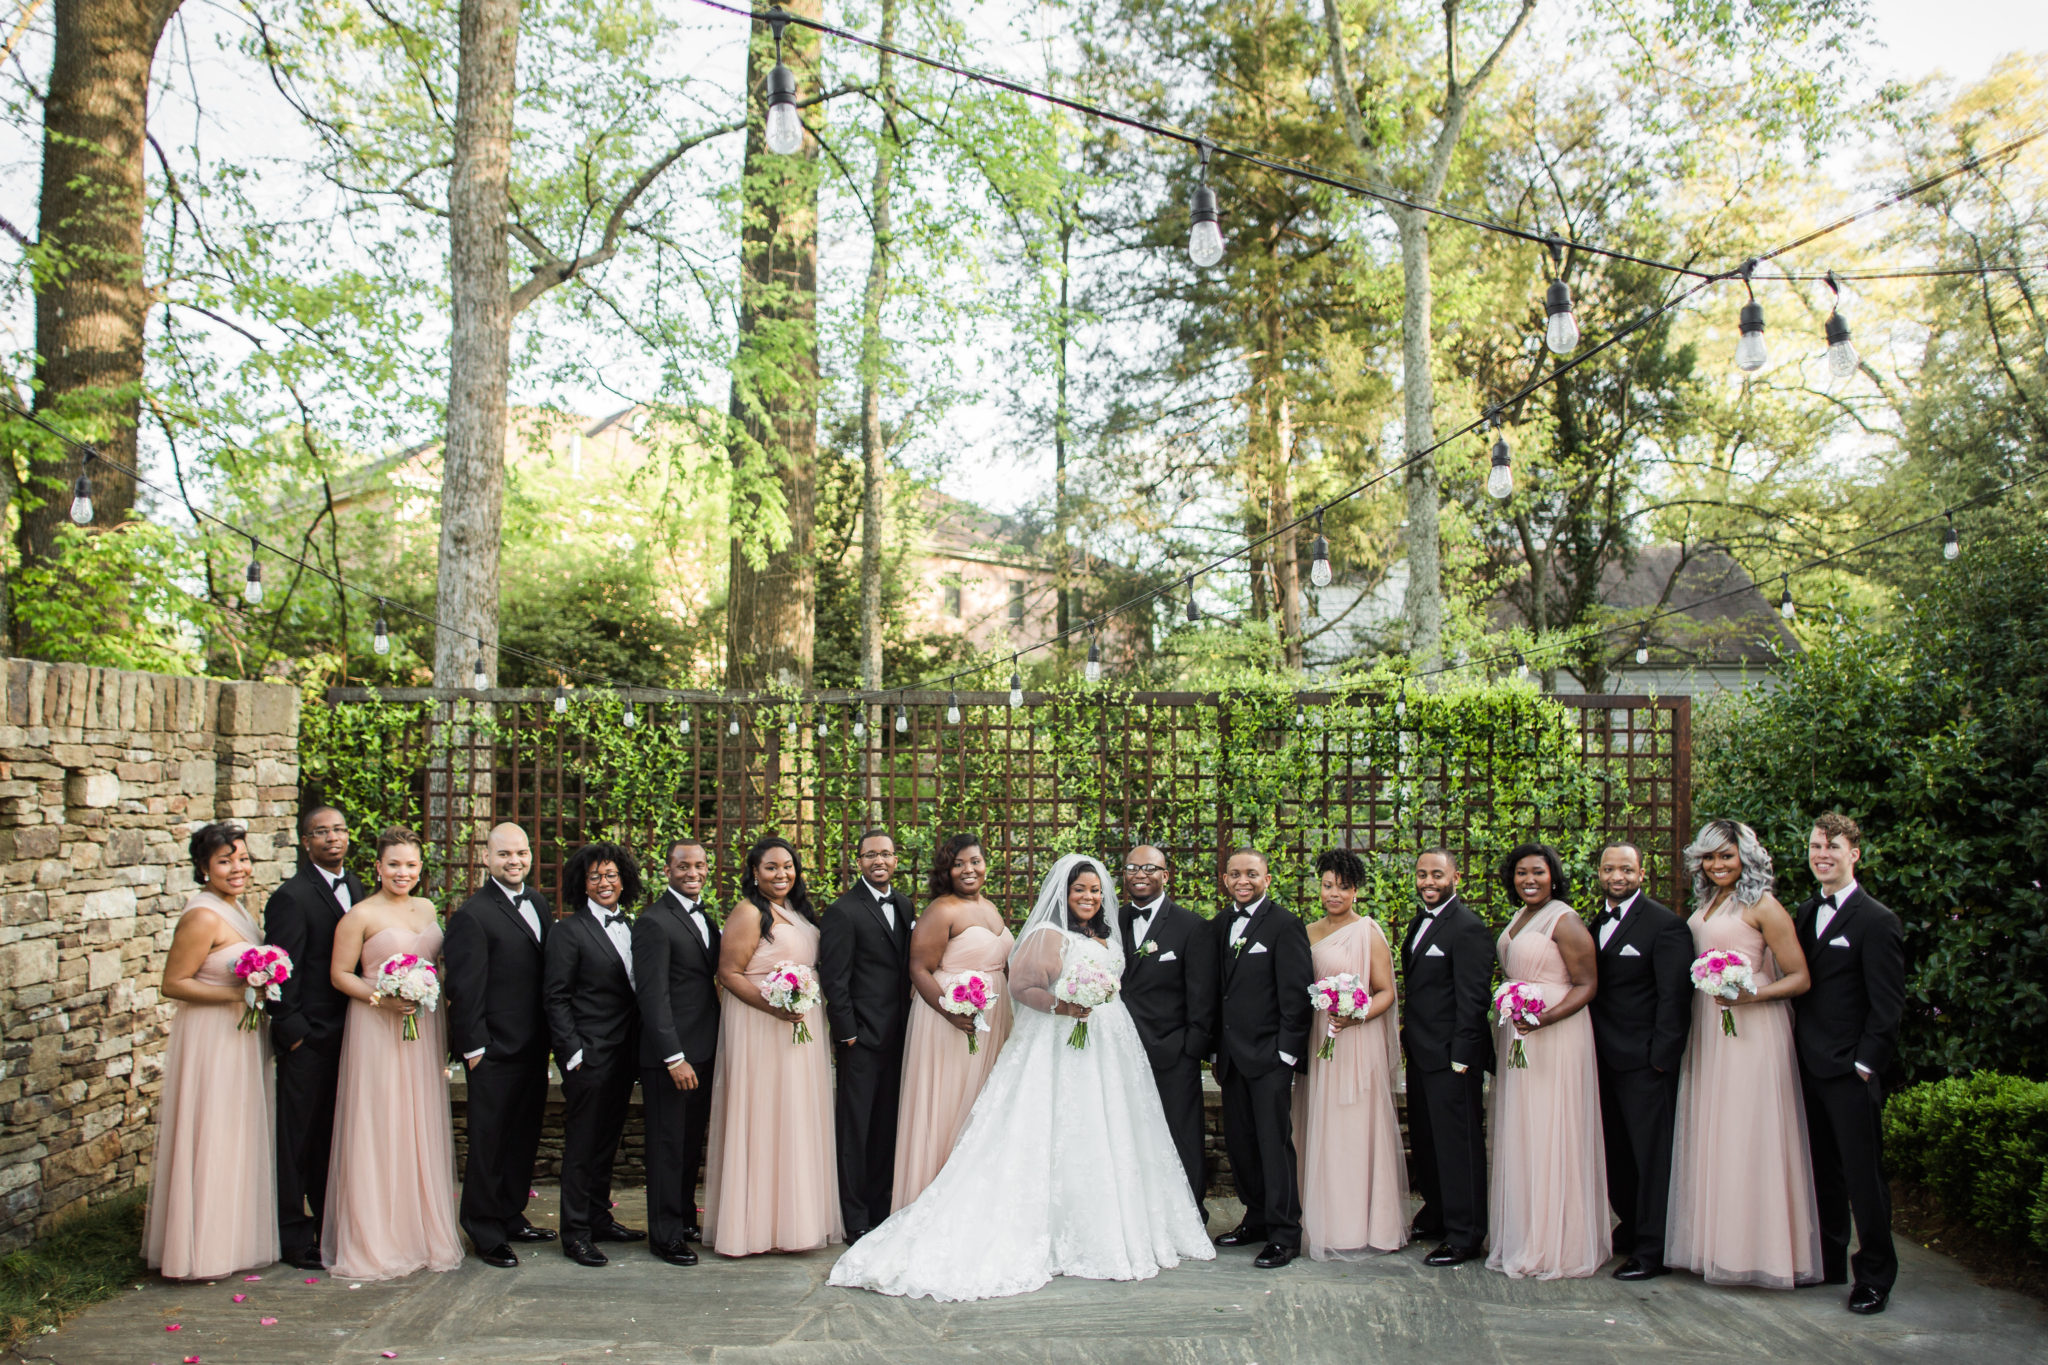 REAL WEDDING | Blush, Sparkles and Pink Tennessee Wedding | Elle Daniel Photography | Pretty Pear Bride